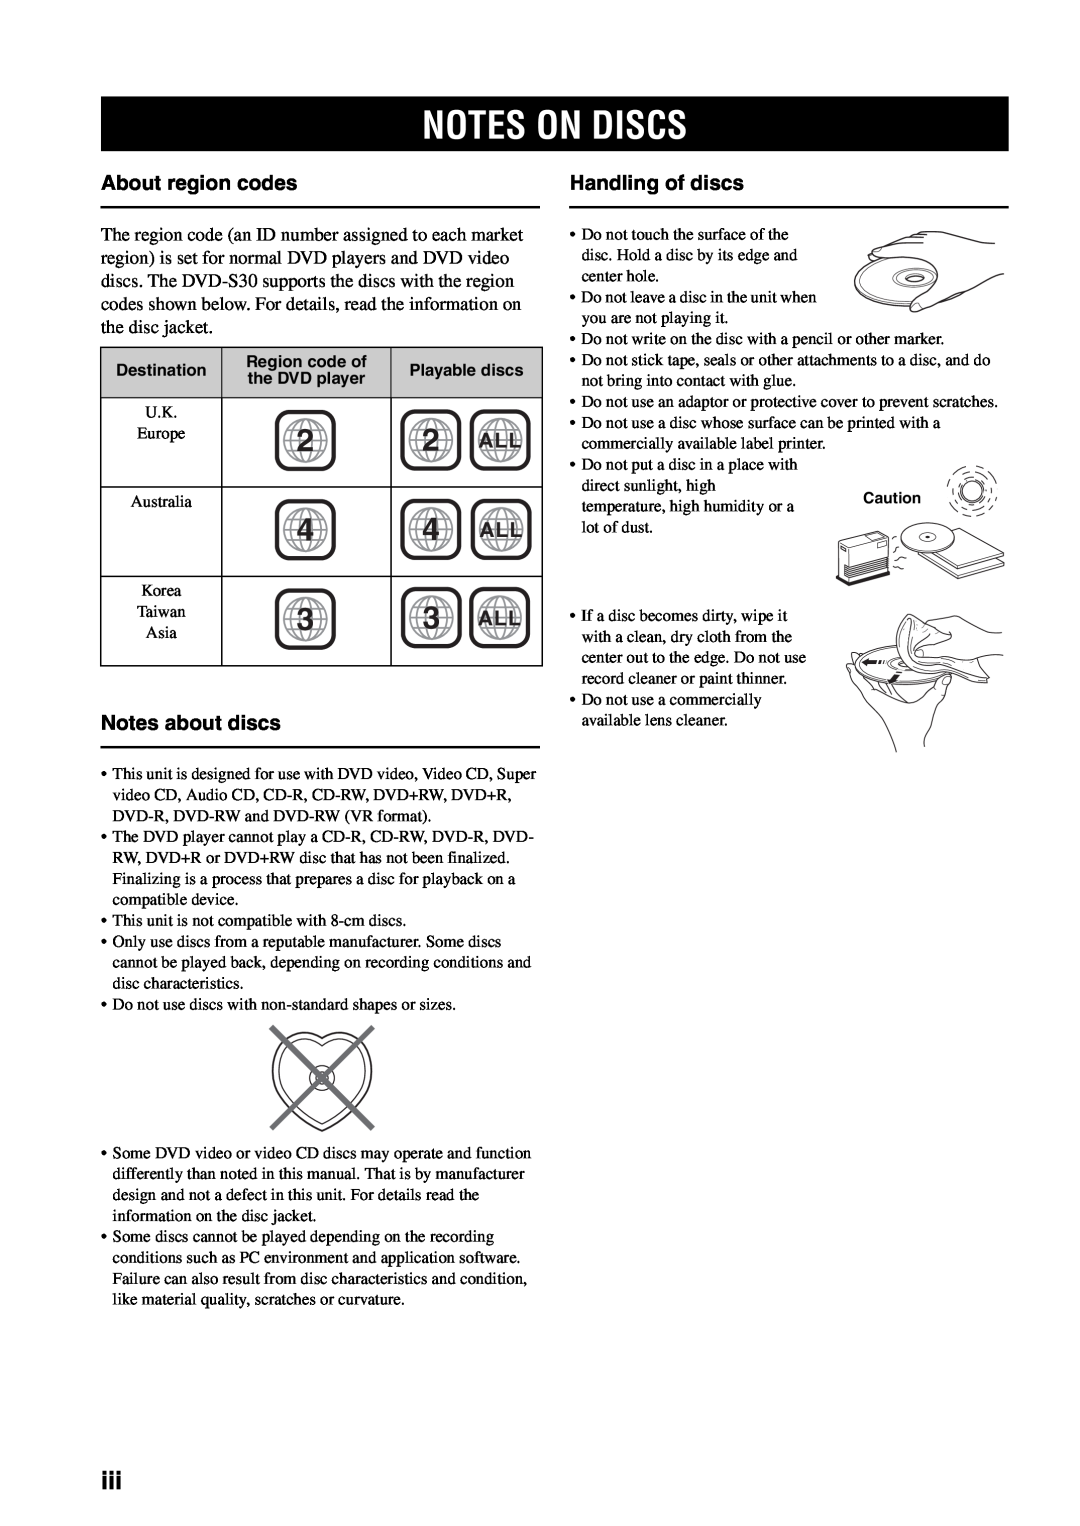 Yamaha AVX-S30 owner manual Notes On Discs, About region codes, Notes about discs, Handling of discs 